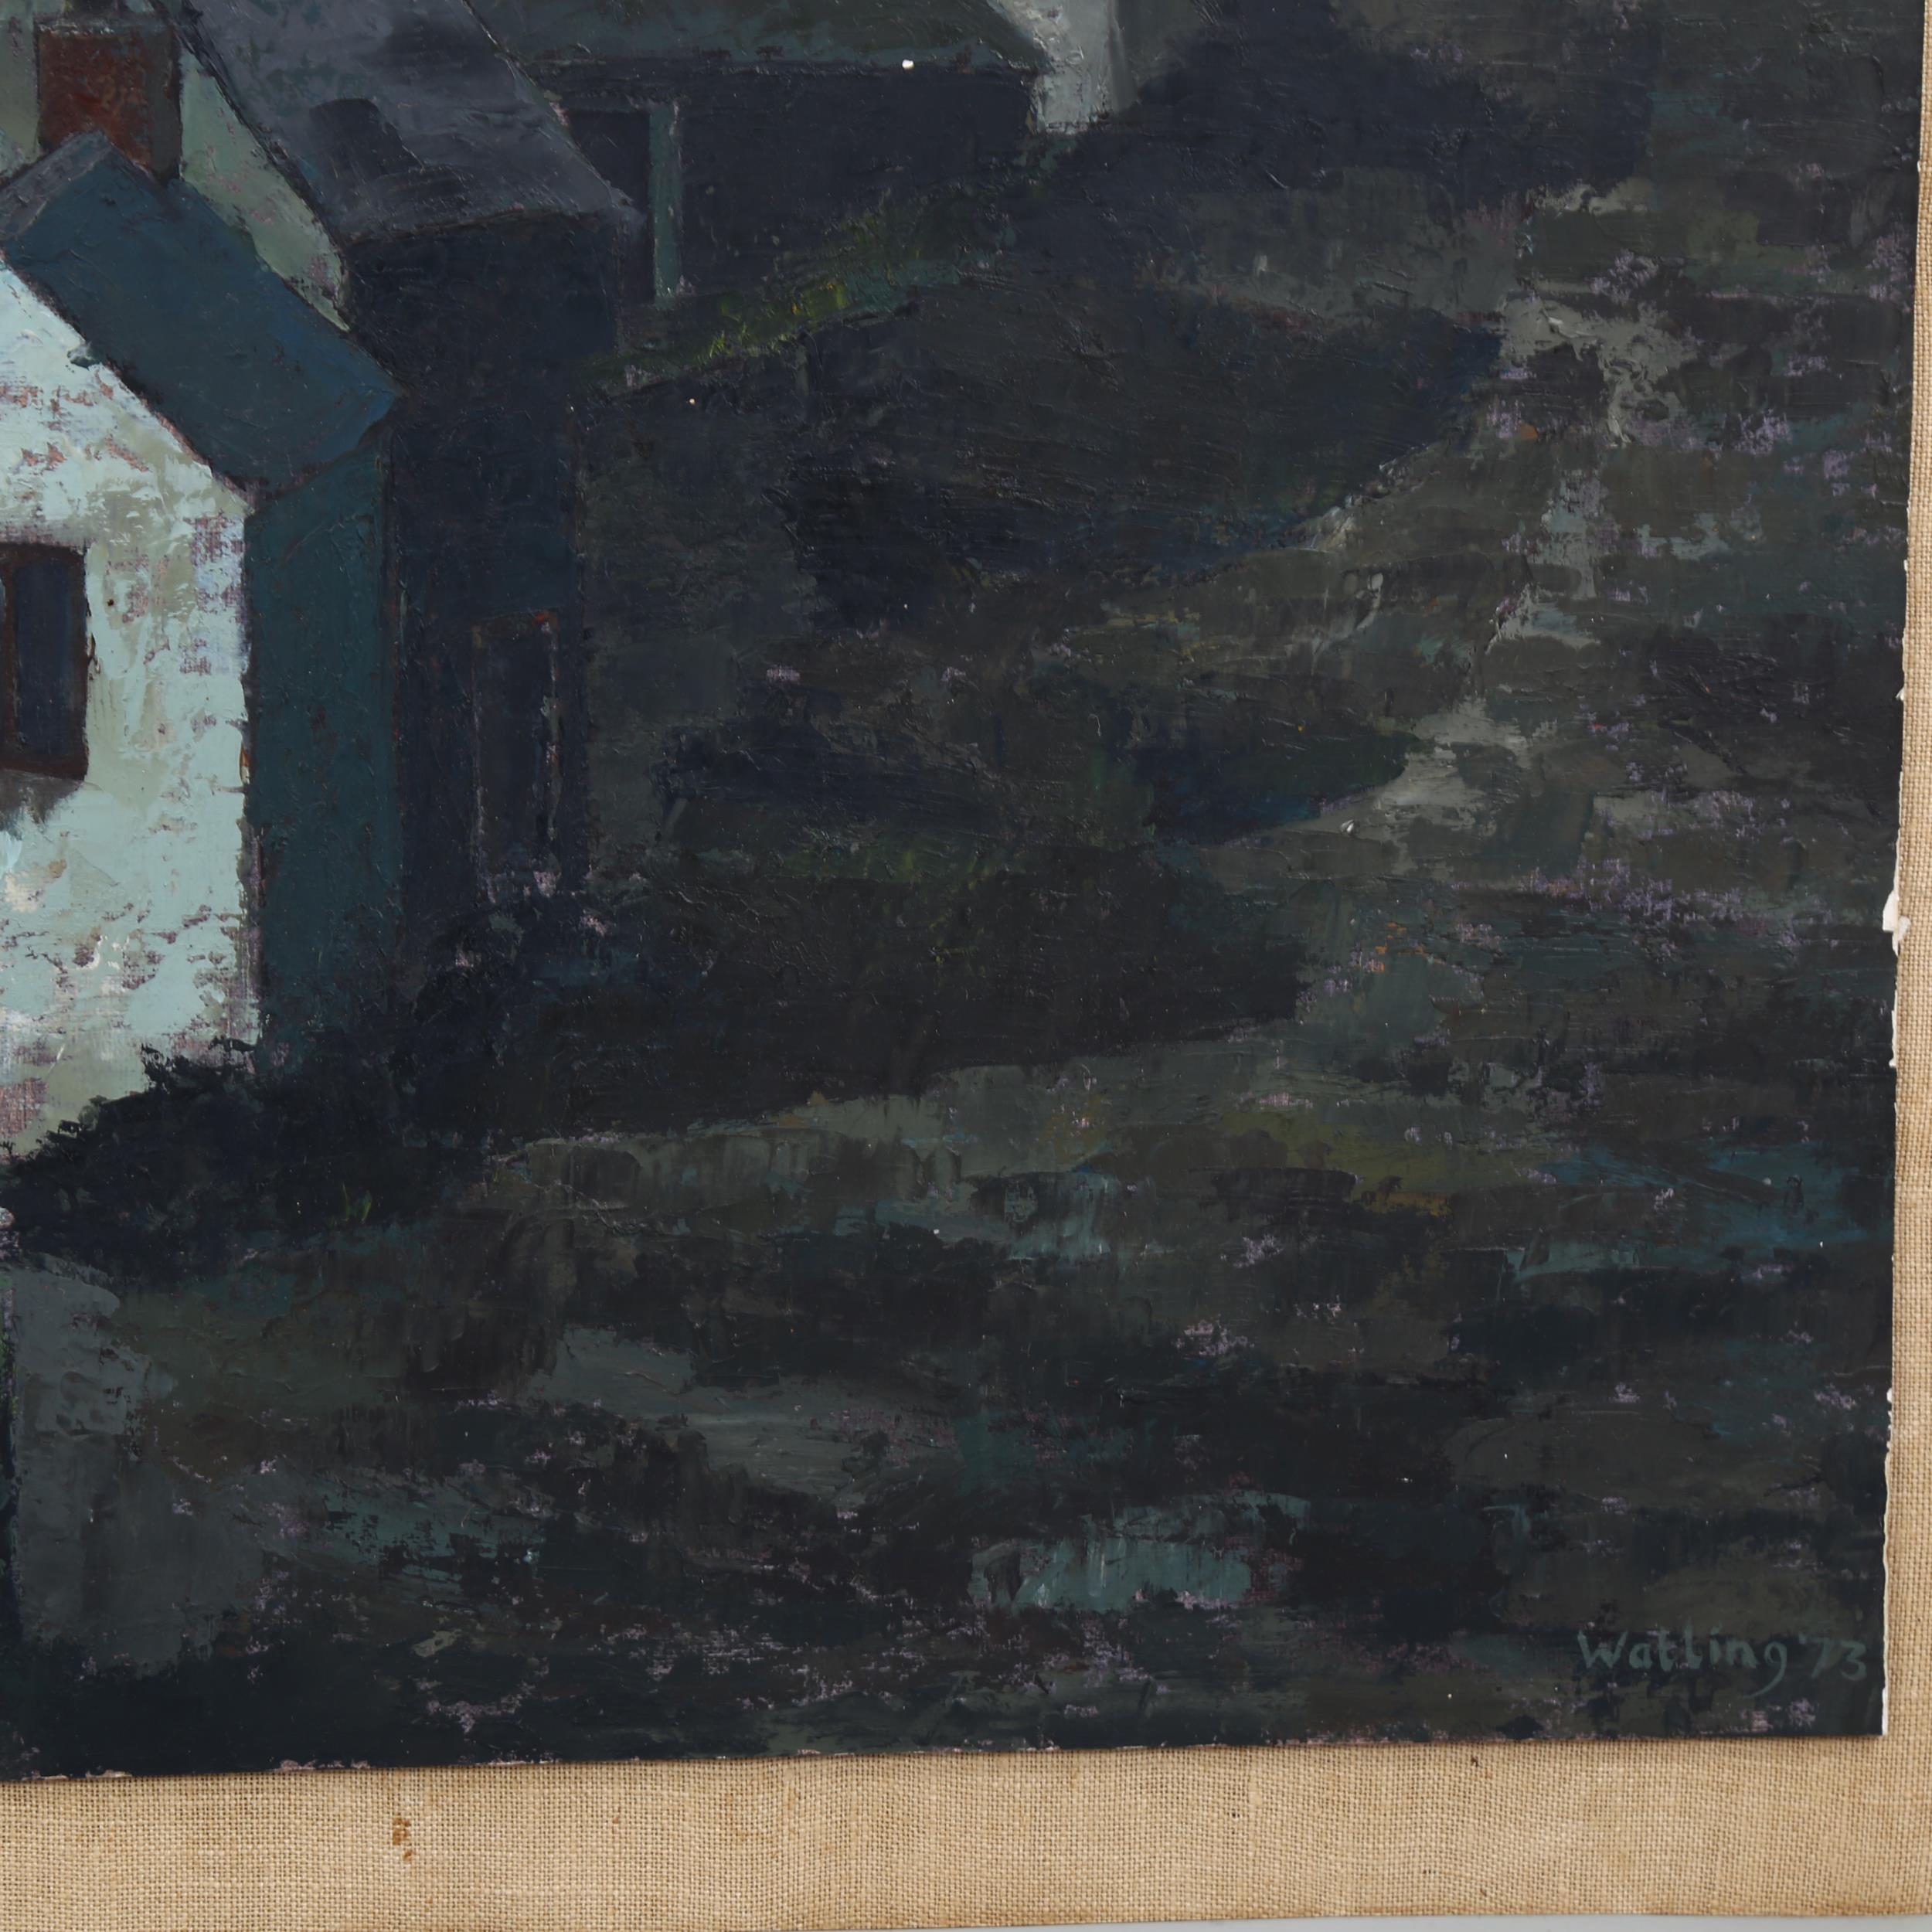 Watling, village scene, mid-20th century oil on canvas, signed and dated '73, 51cm x 71cm, framed - Image 2 of 4